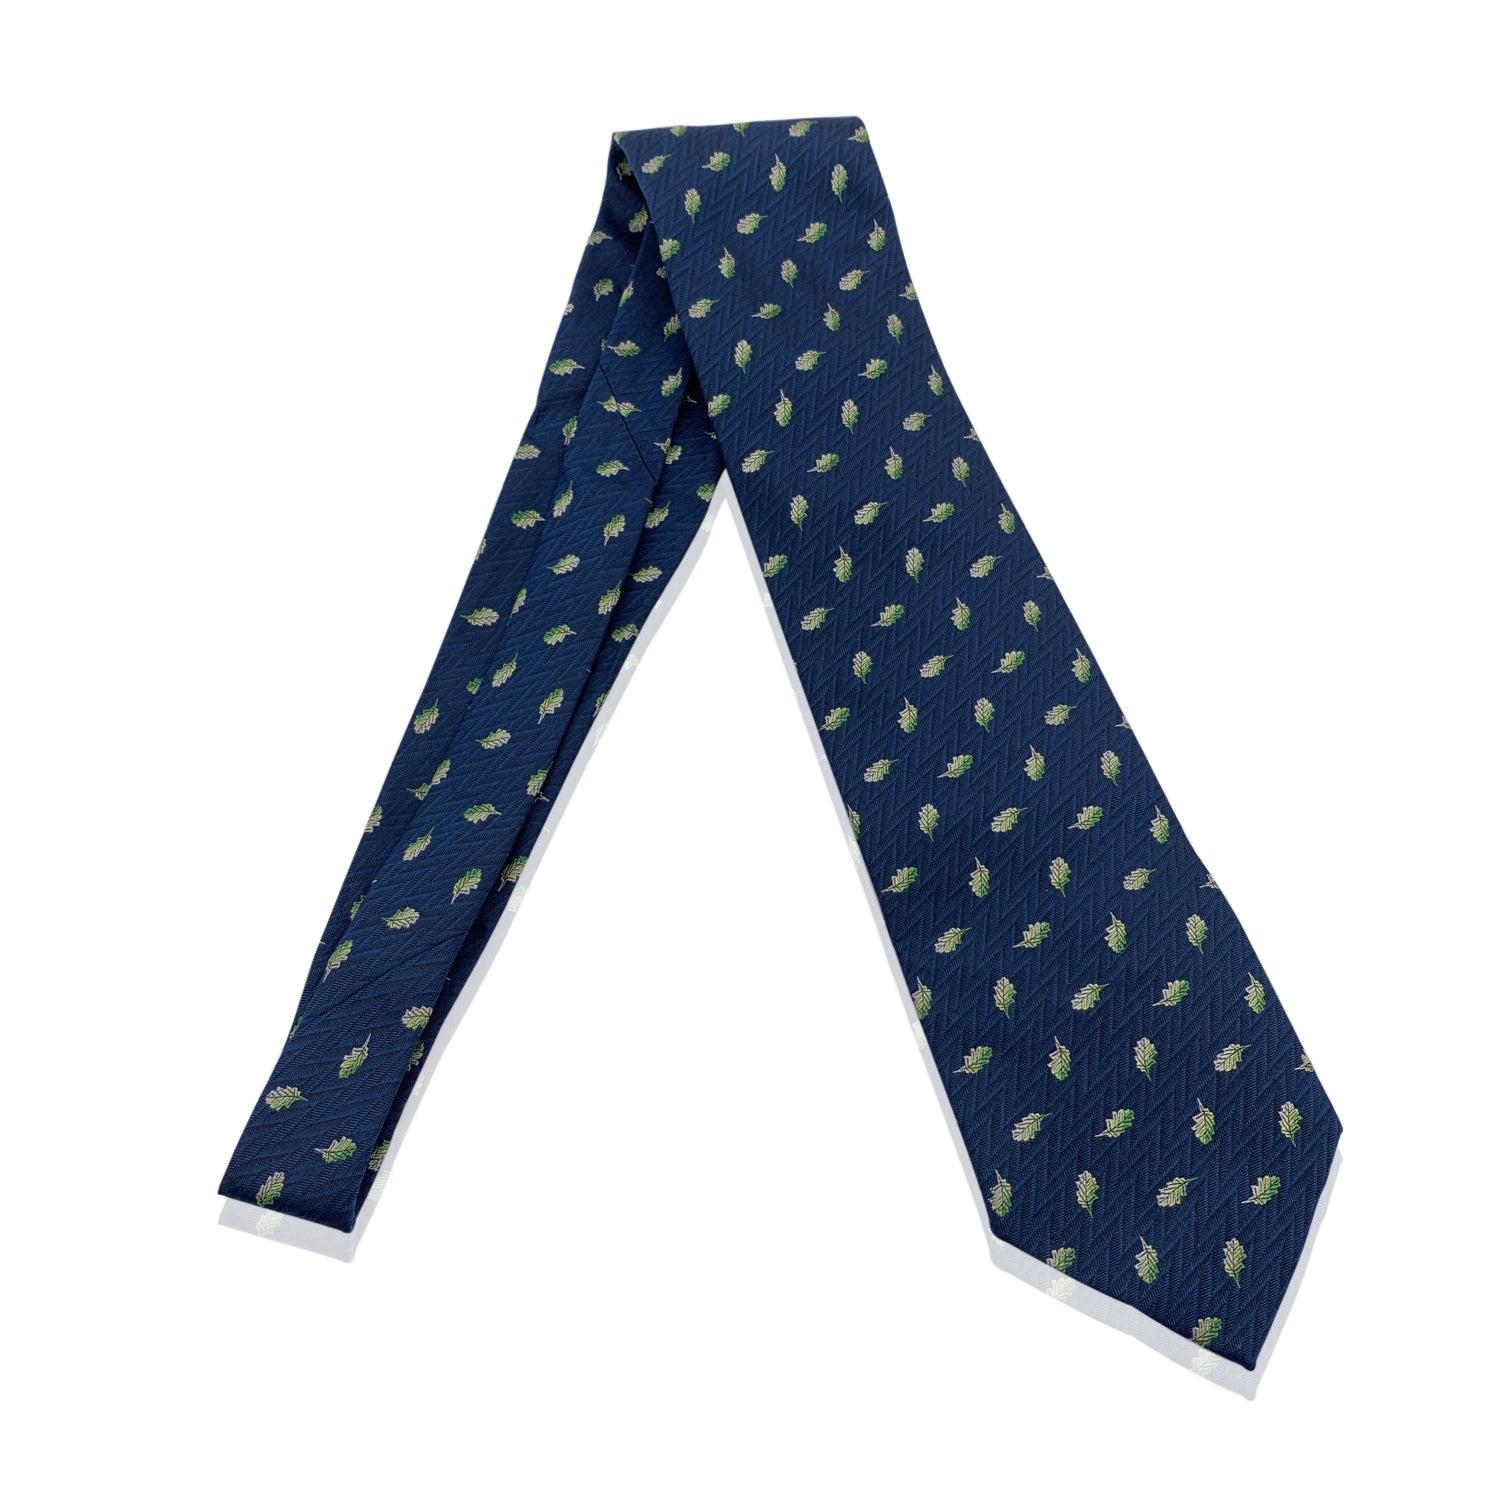 Elegant Hermes Neck Tie in blue teal color with an allover leaves pattern. Composition: 100% Silk. Hermes composition tag attached. Made in France. Total length: 58.5 inches - 148.5 cm. Max width: 3.5 inches - 8.9 cm Details MATERIAL: Silk COLOR: